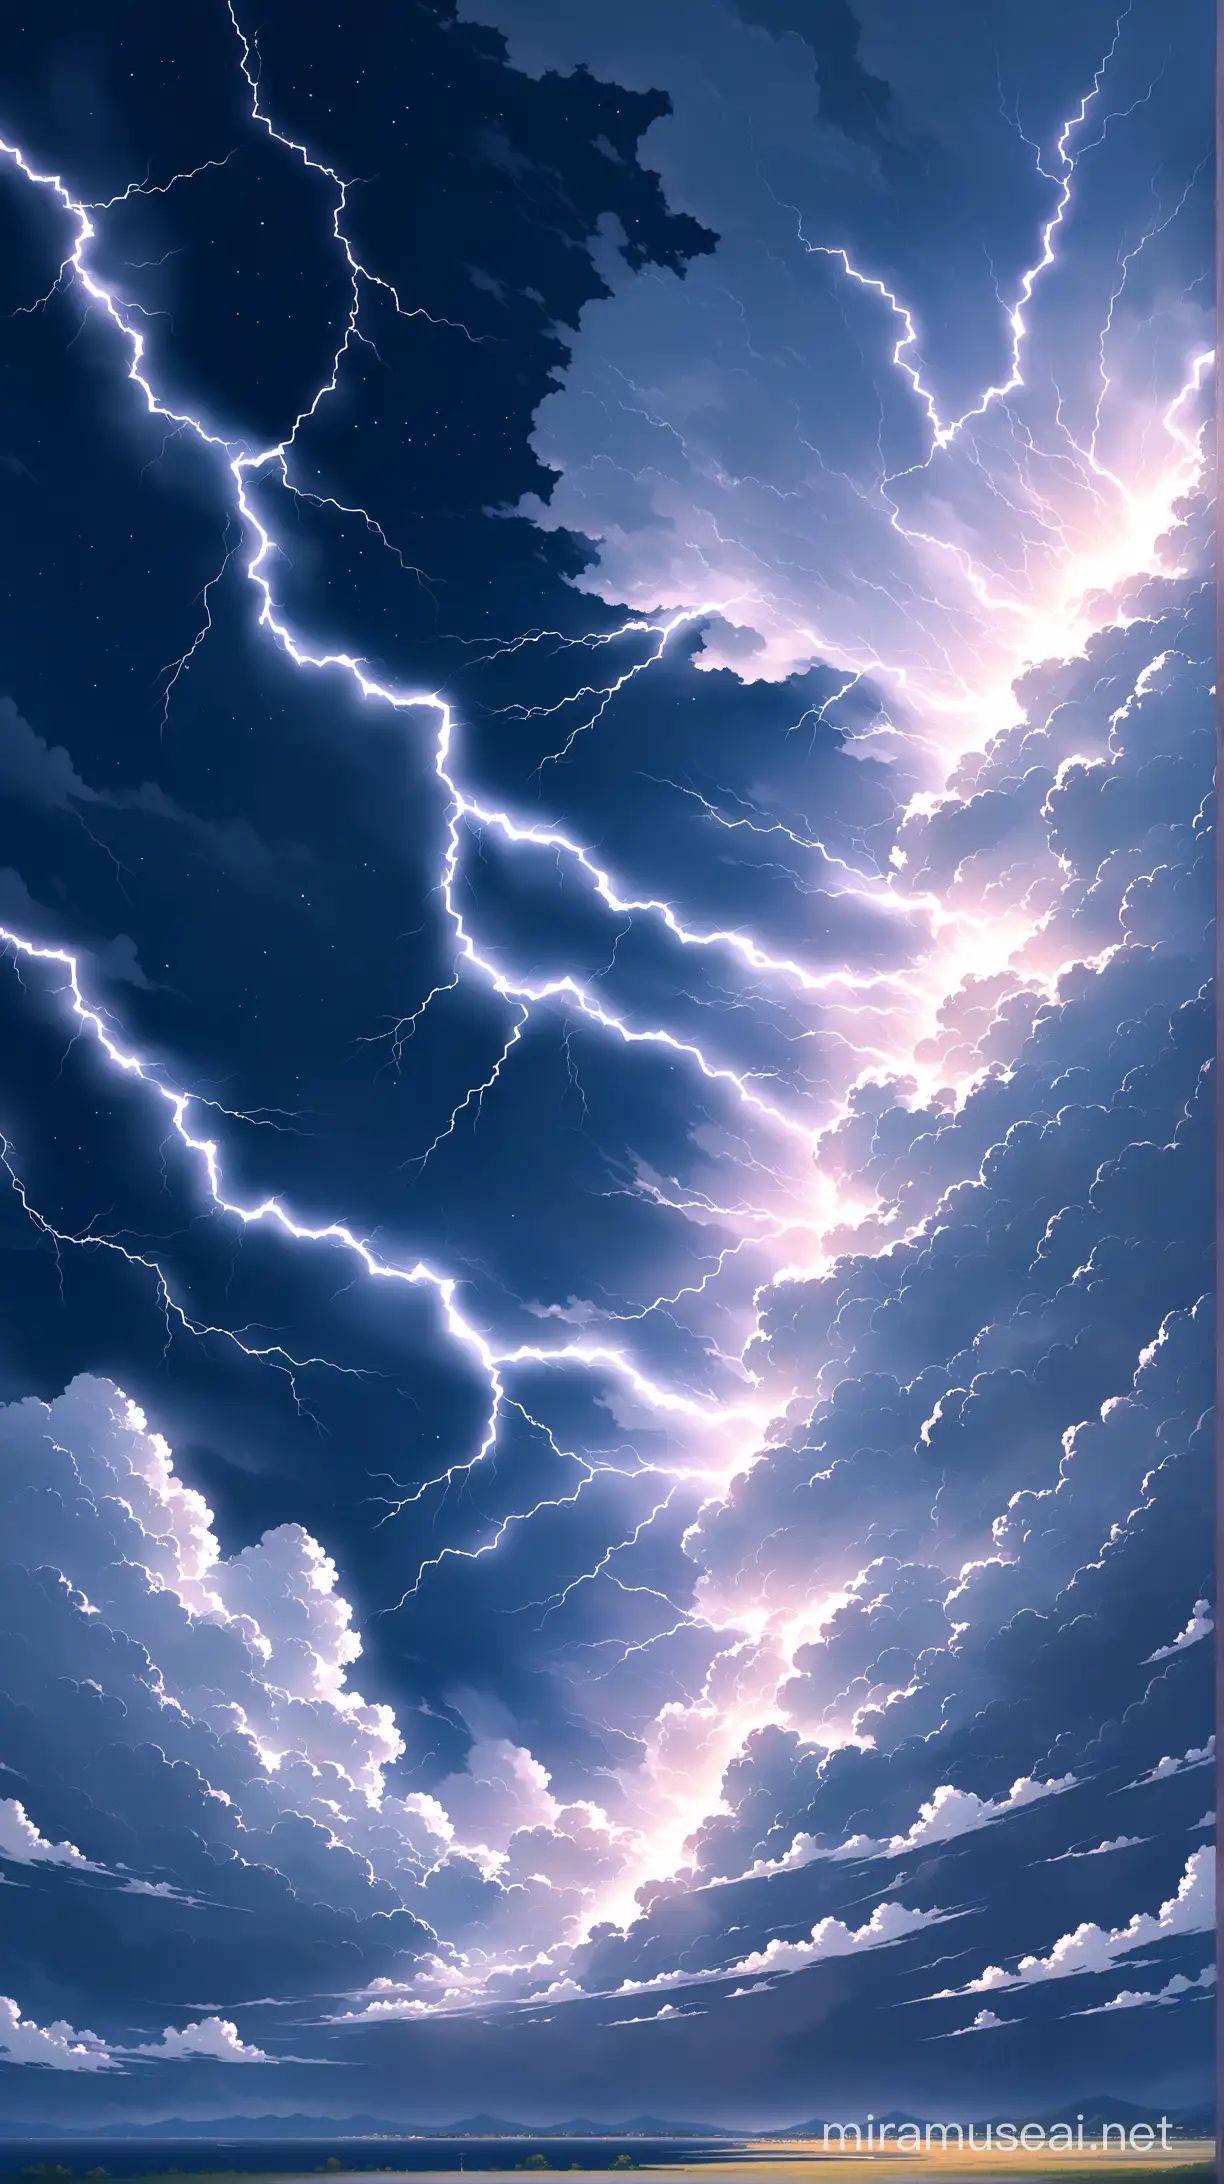 Majestic LightningStreaked Clouds with Heavenly Radiance